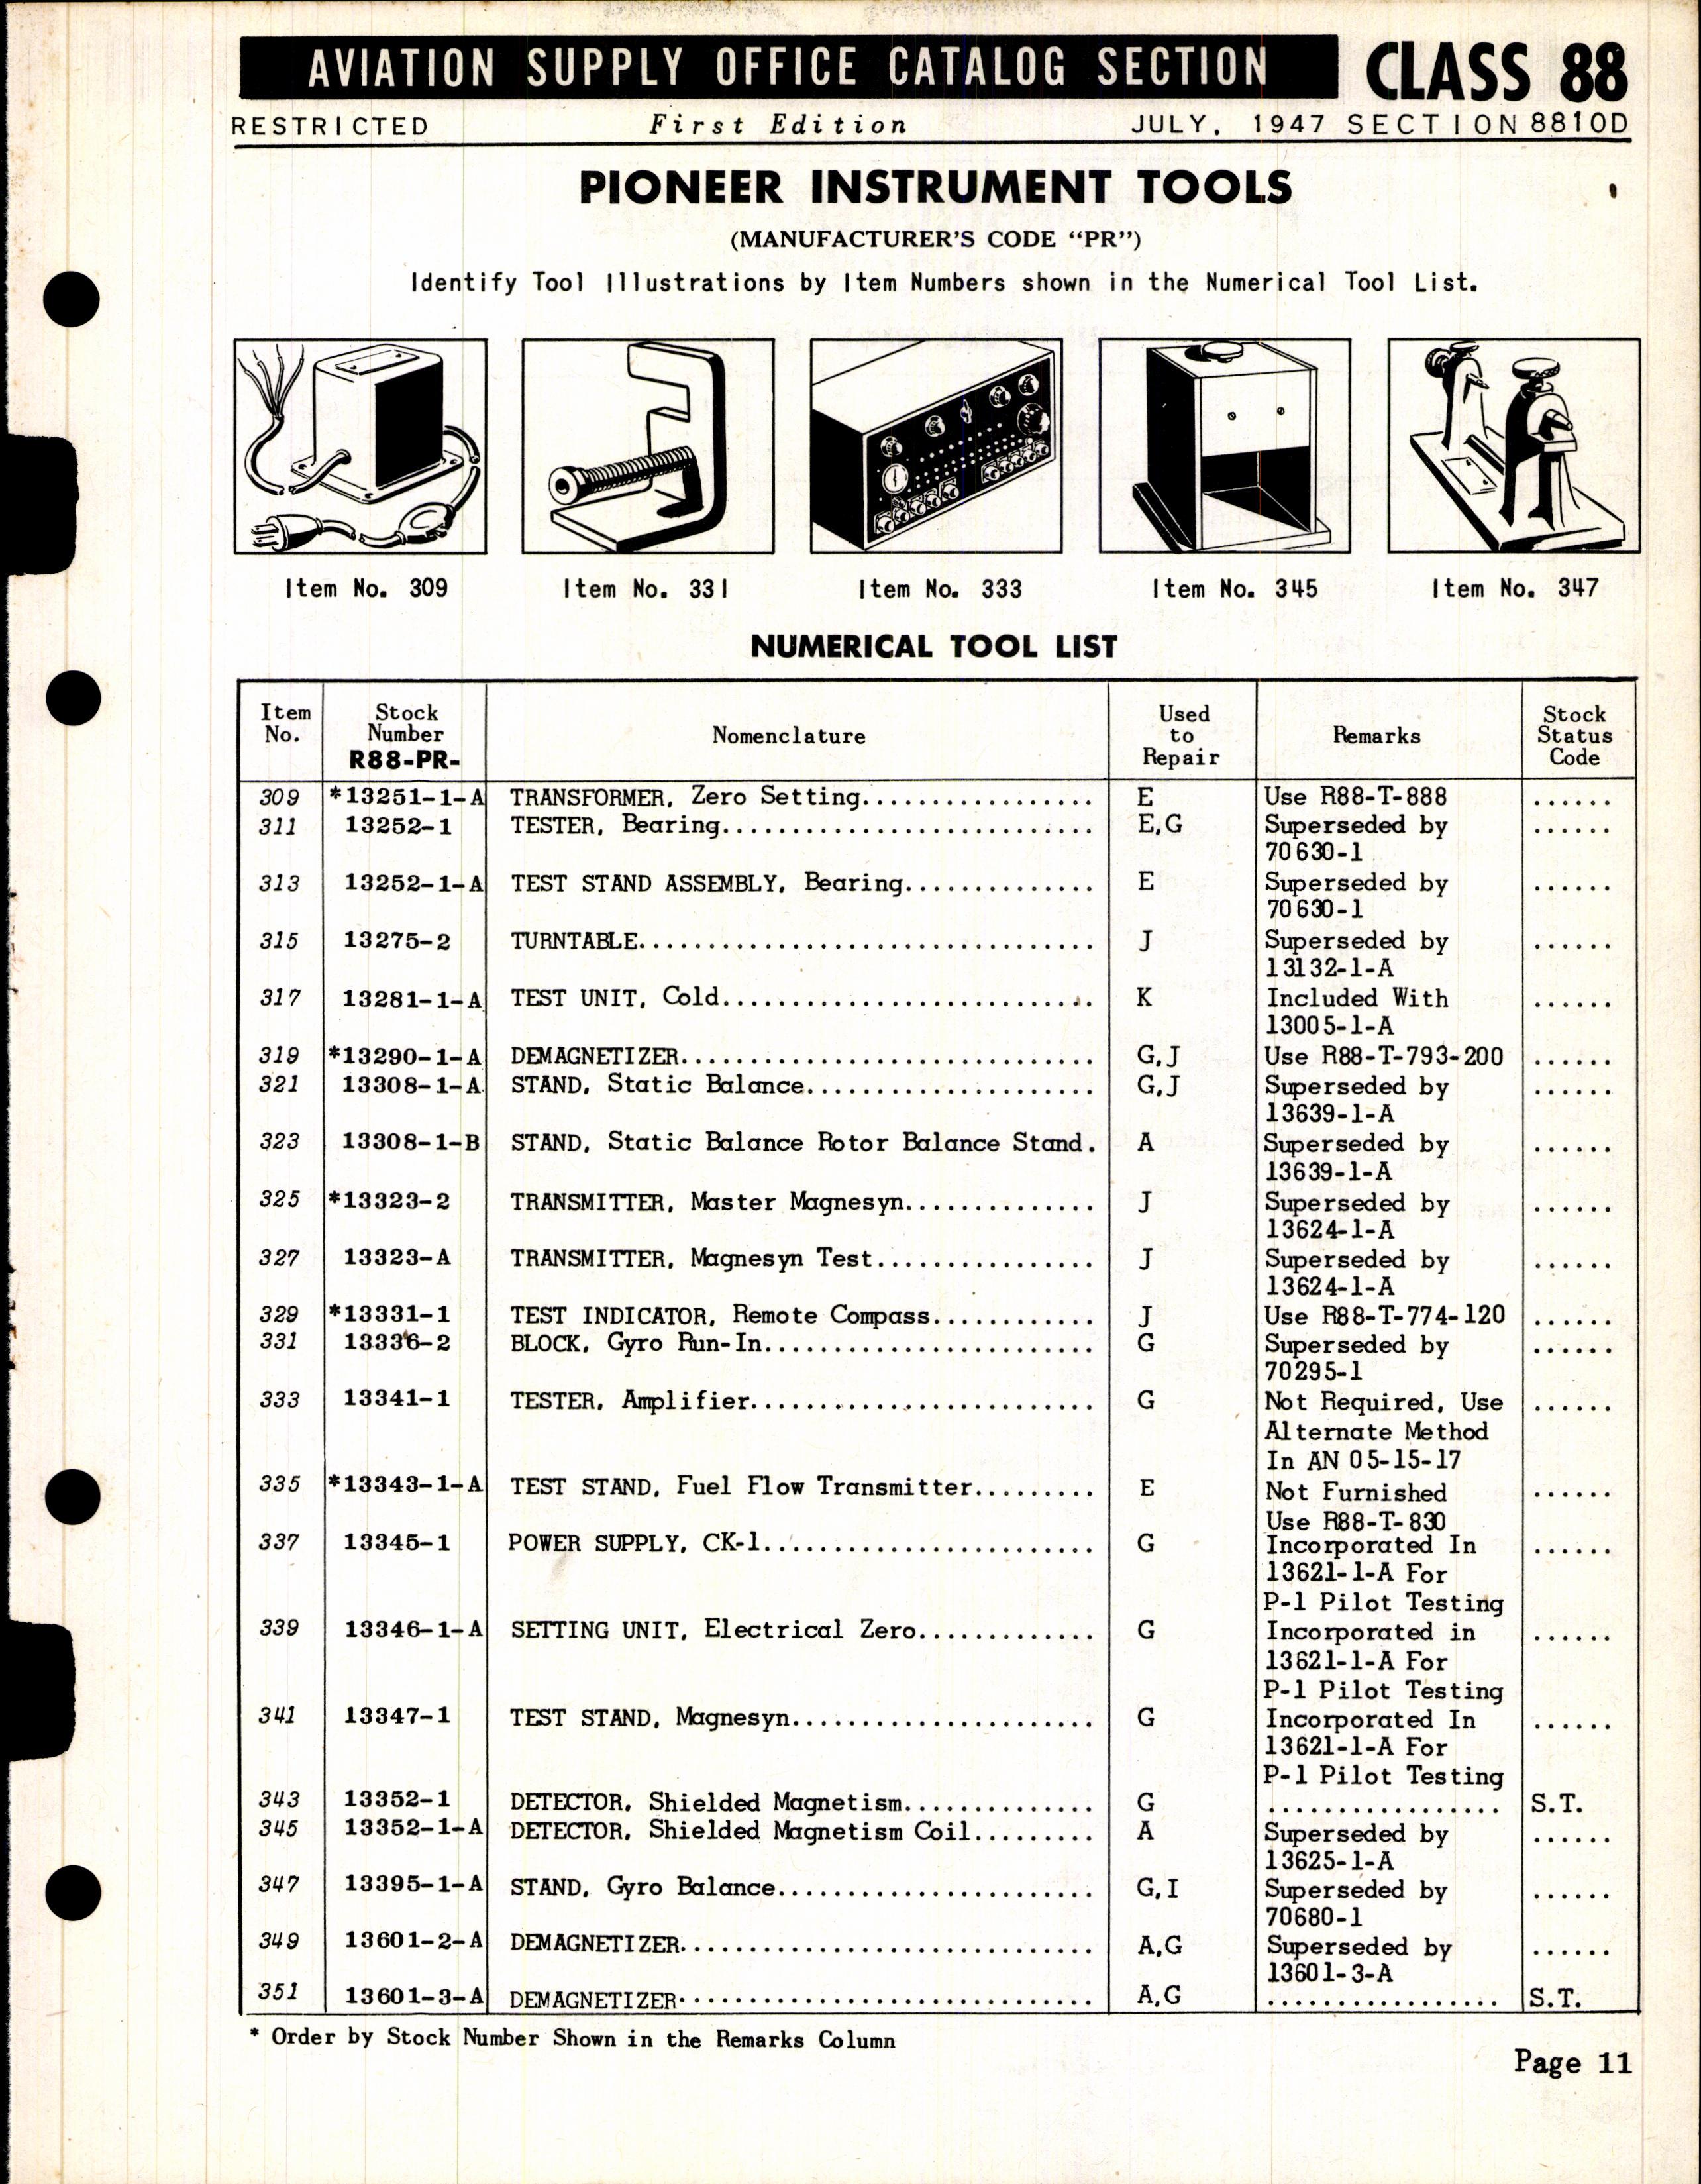 Sample page 11 from AirCorps Library document: Pioneer Instrument Tools